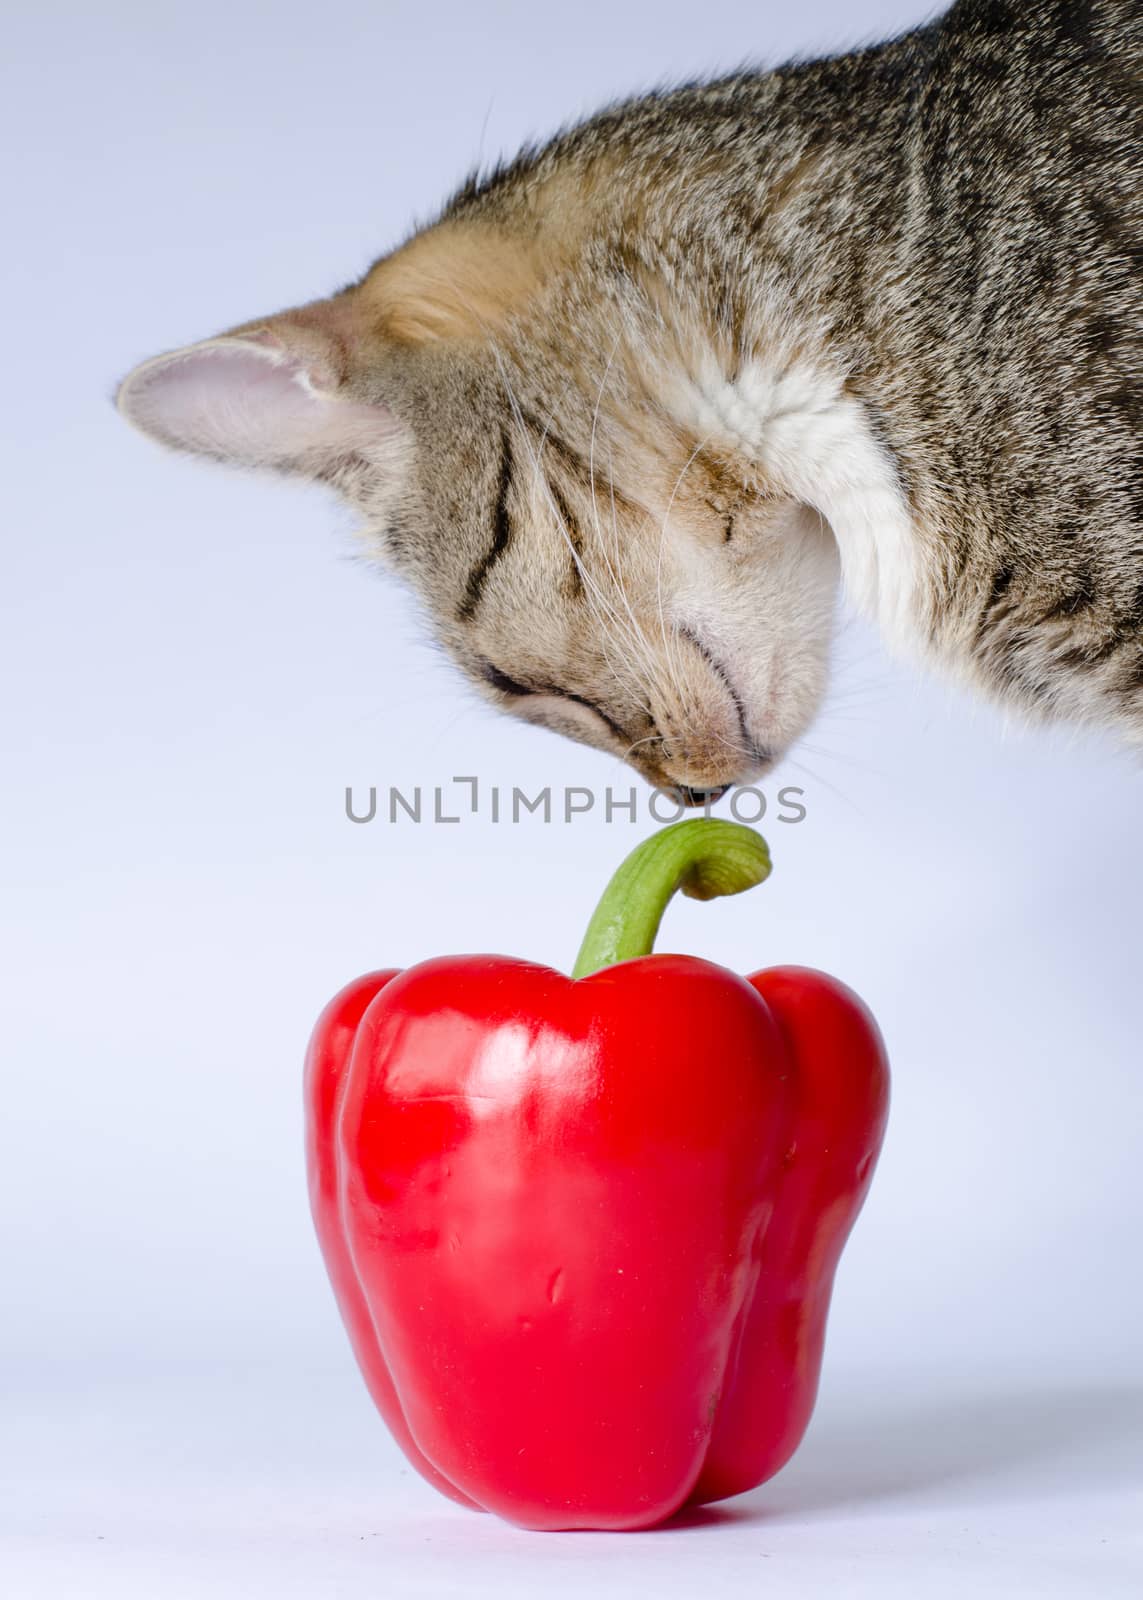 kitten and red pepper by sarkao